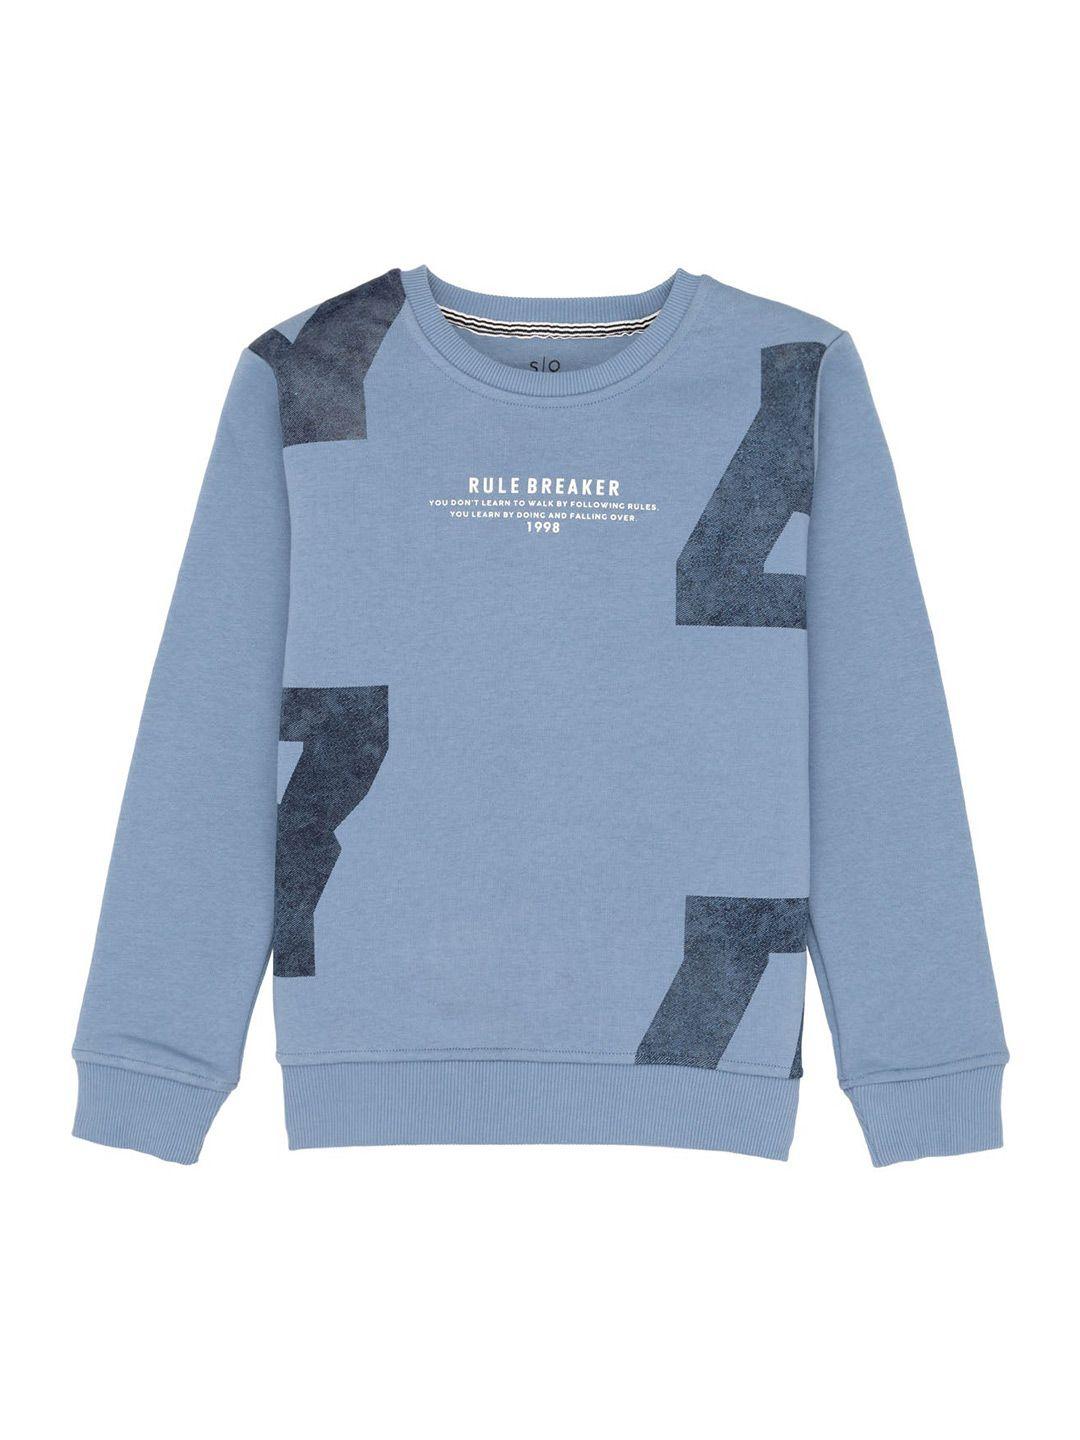 status quo boys abstract printed pullover